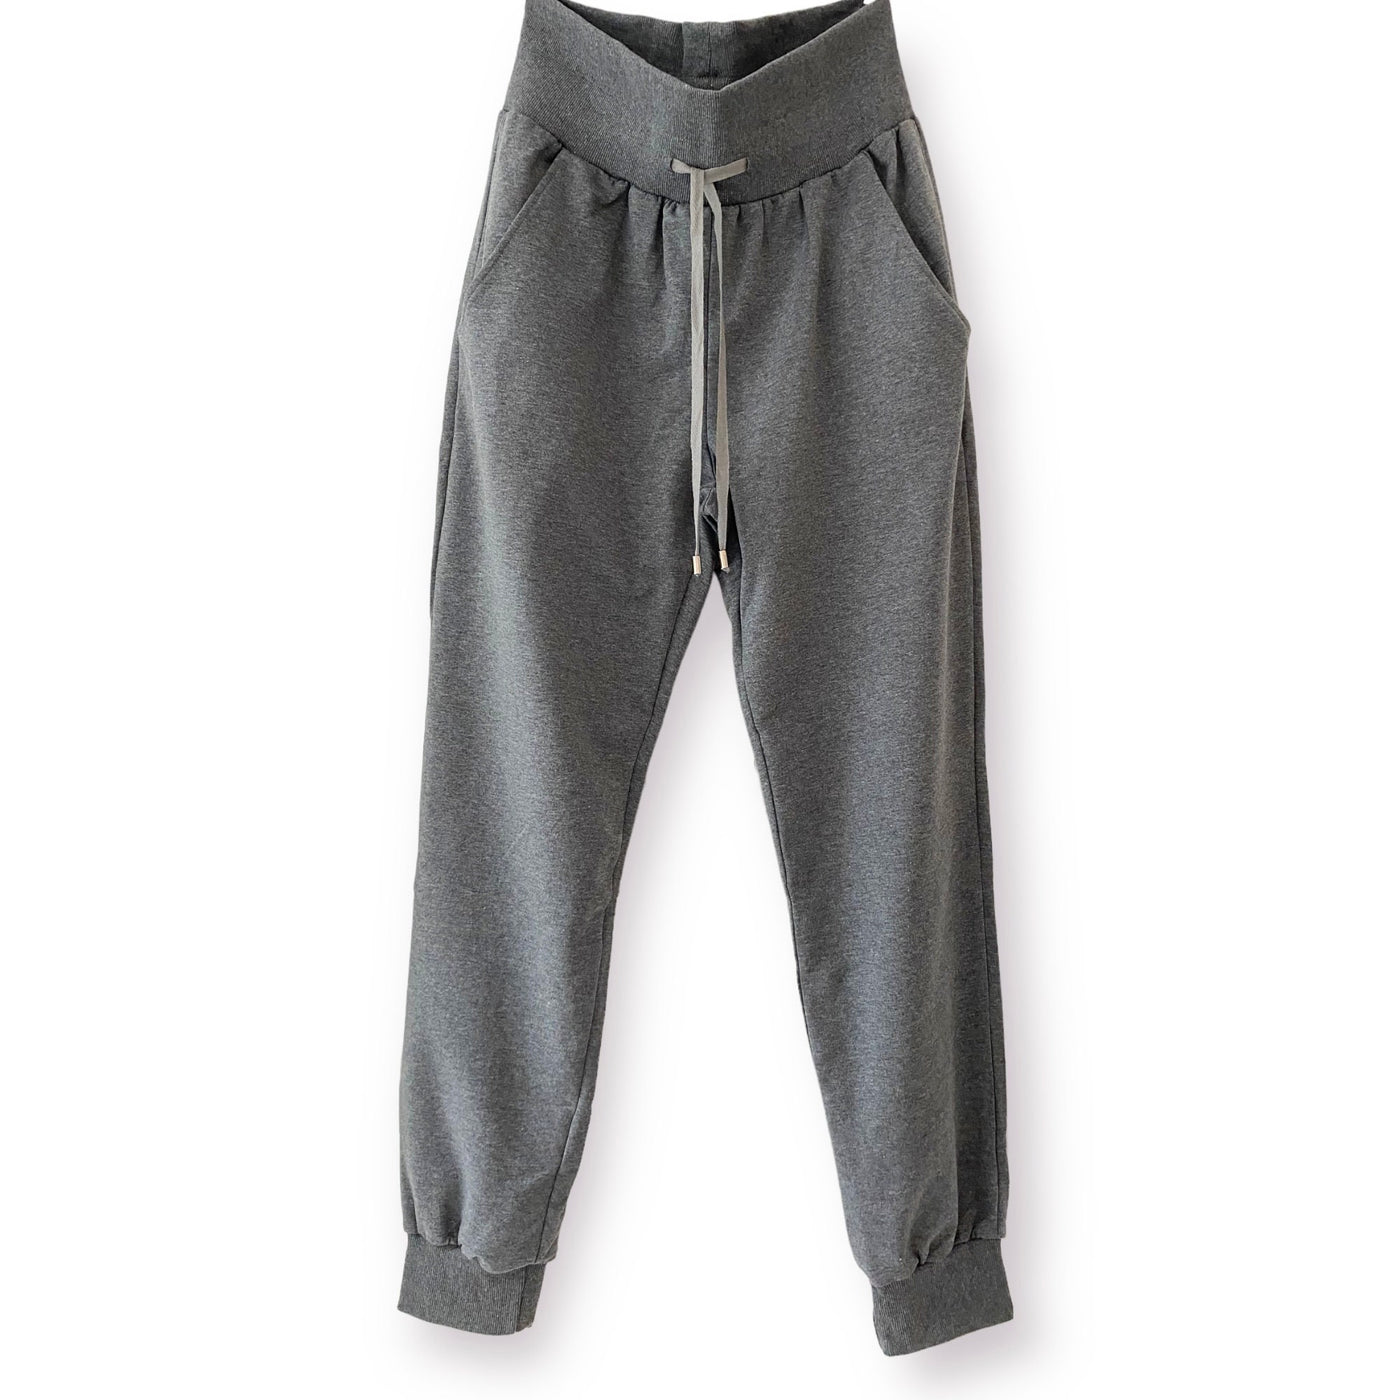 Classic Grey Jogger with Deep Waist Band - Pink Waters 